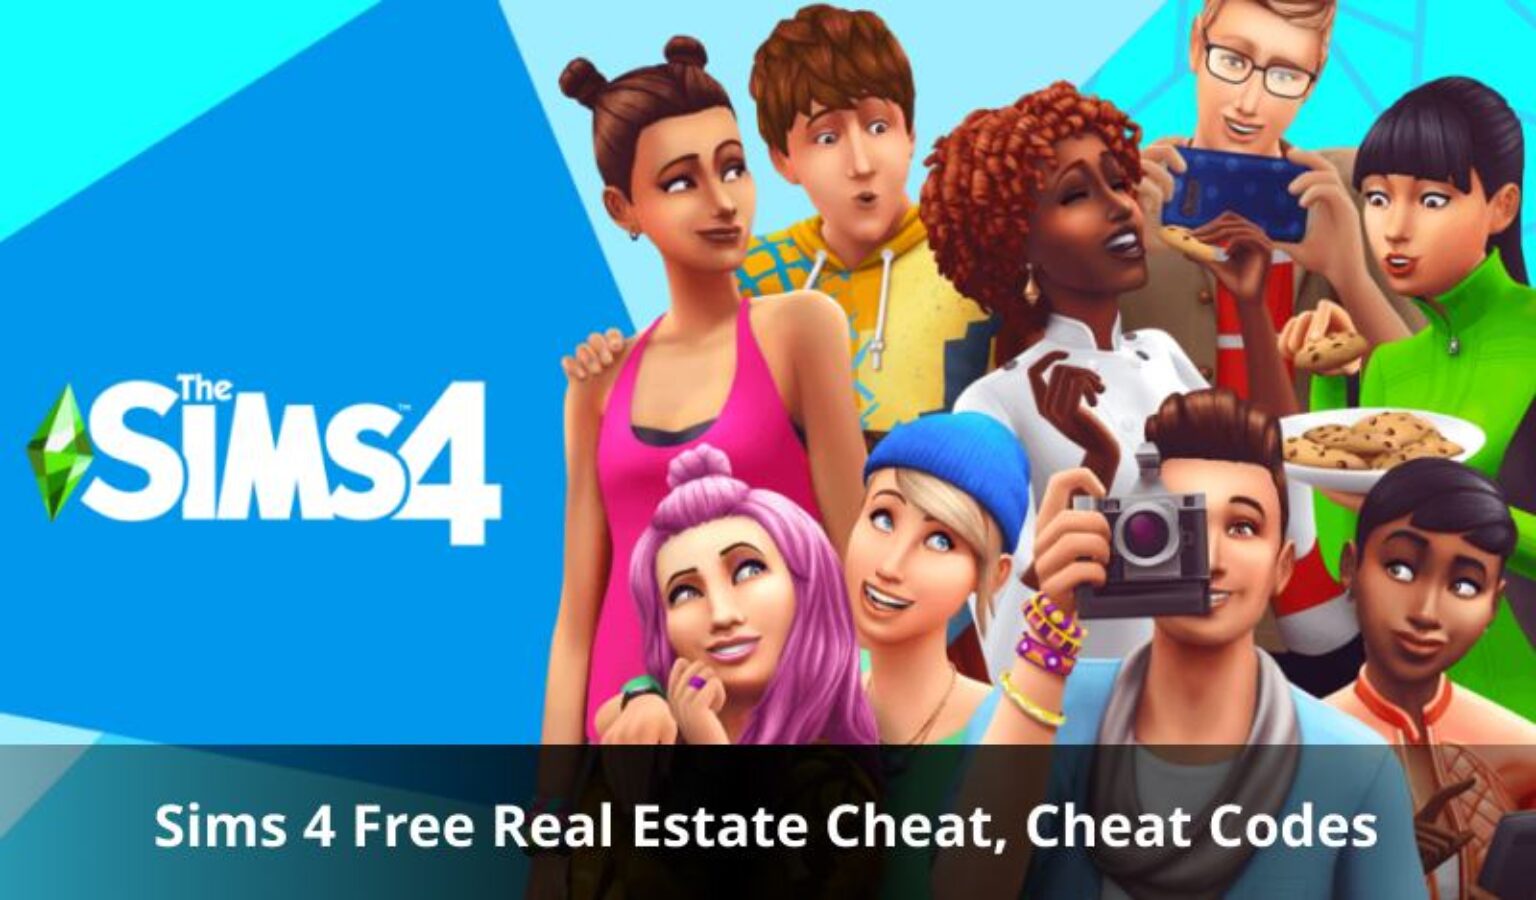 Sims 4 Free Real Estate Cheat Cheat Codes 1536x900 